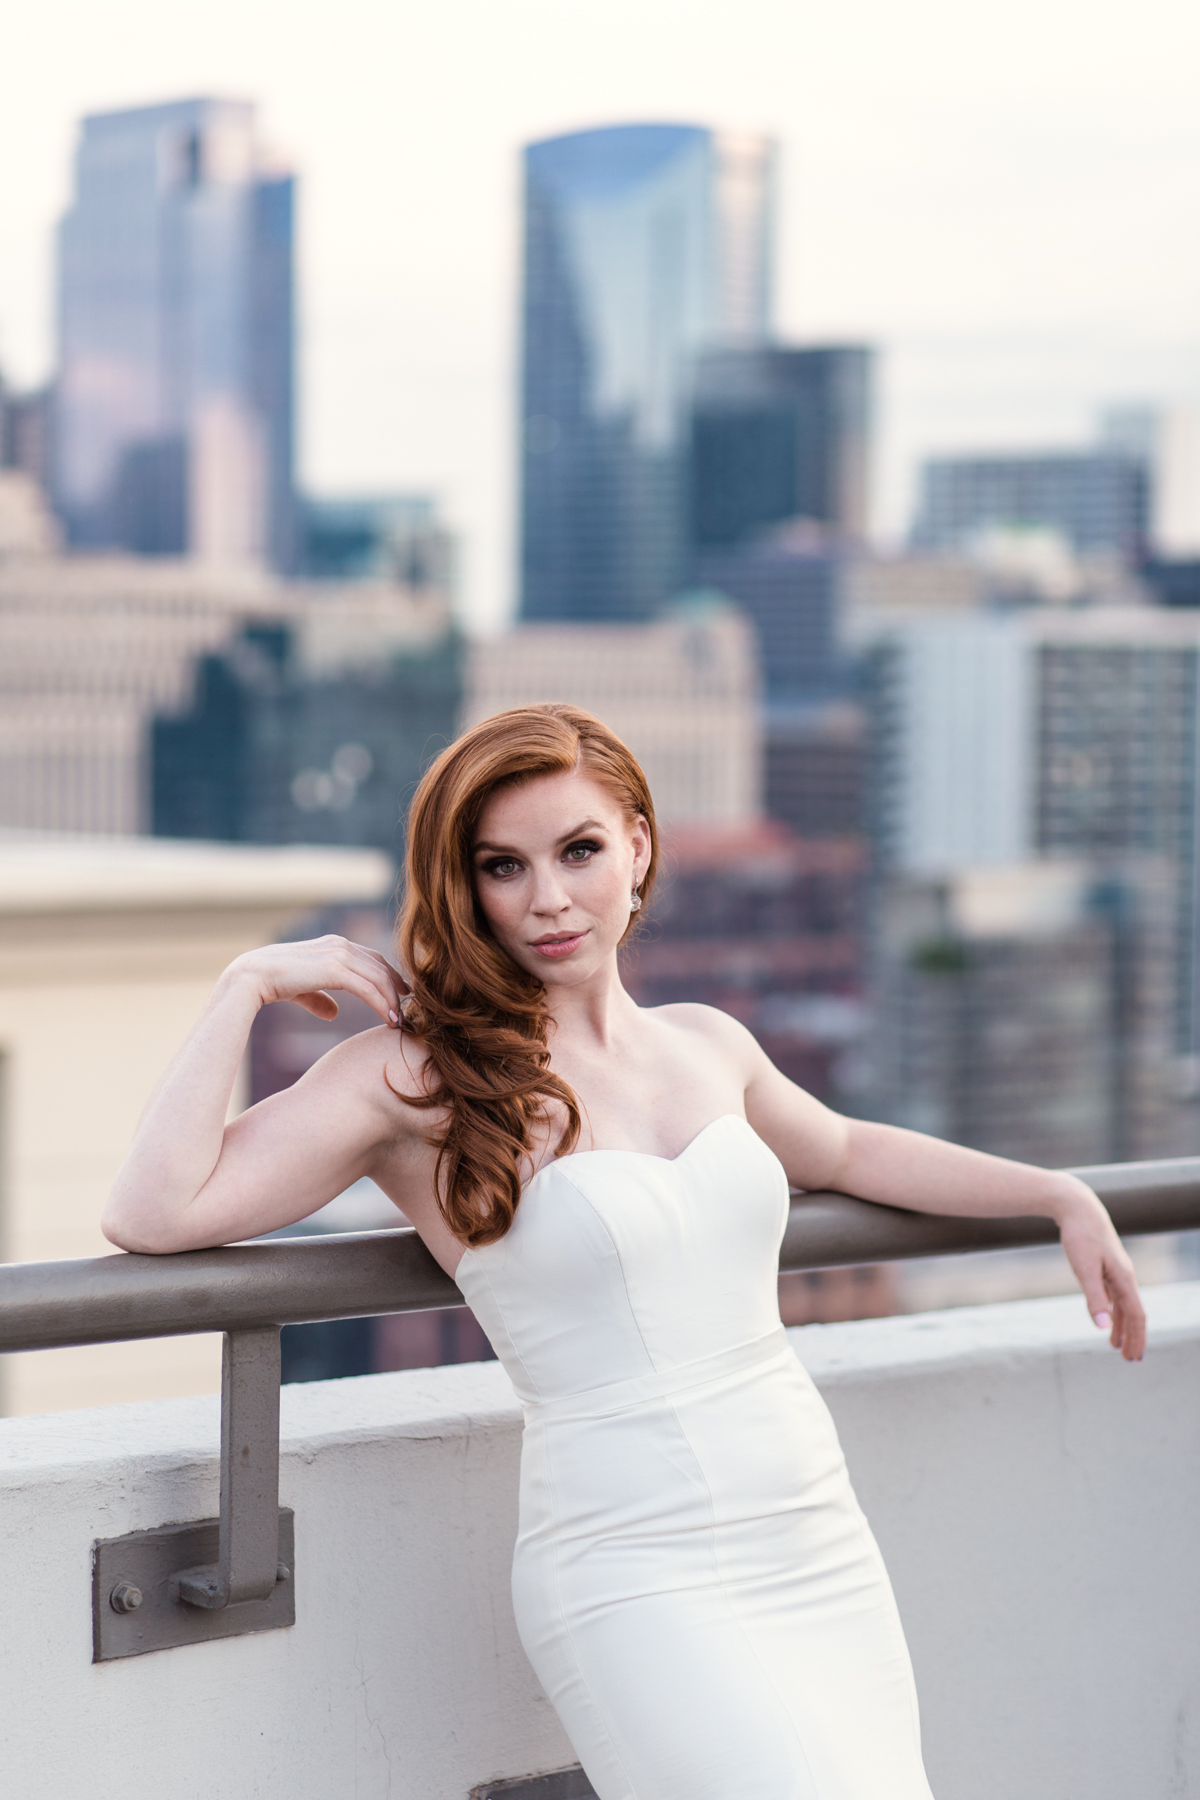 Rooftop-bridal-shoot-by-Emma-Mullins-Photography-30